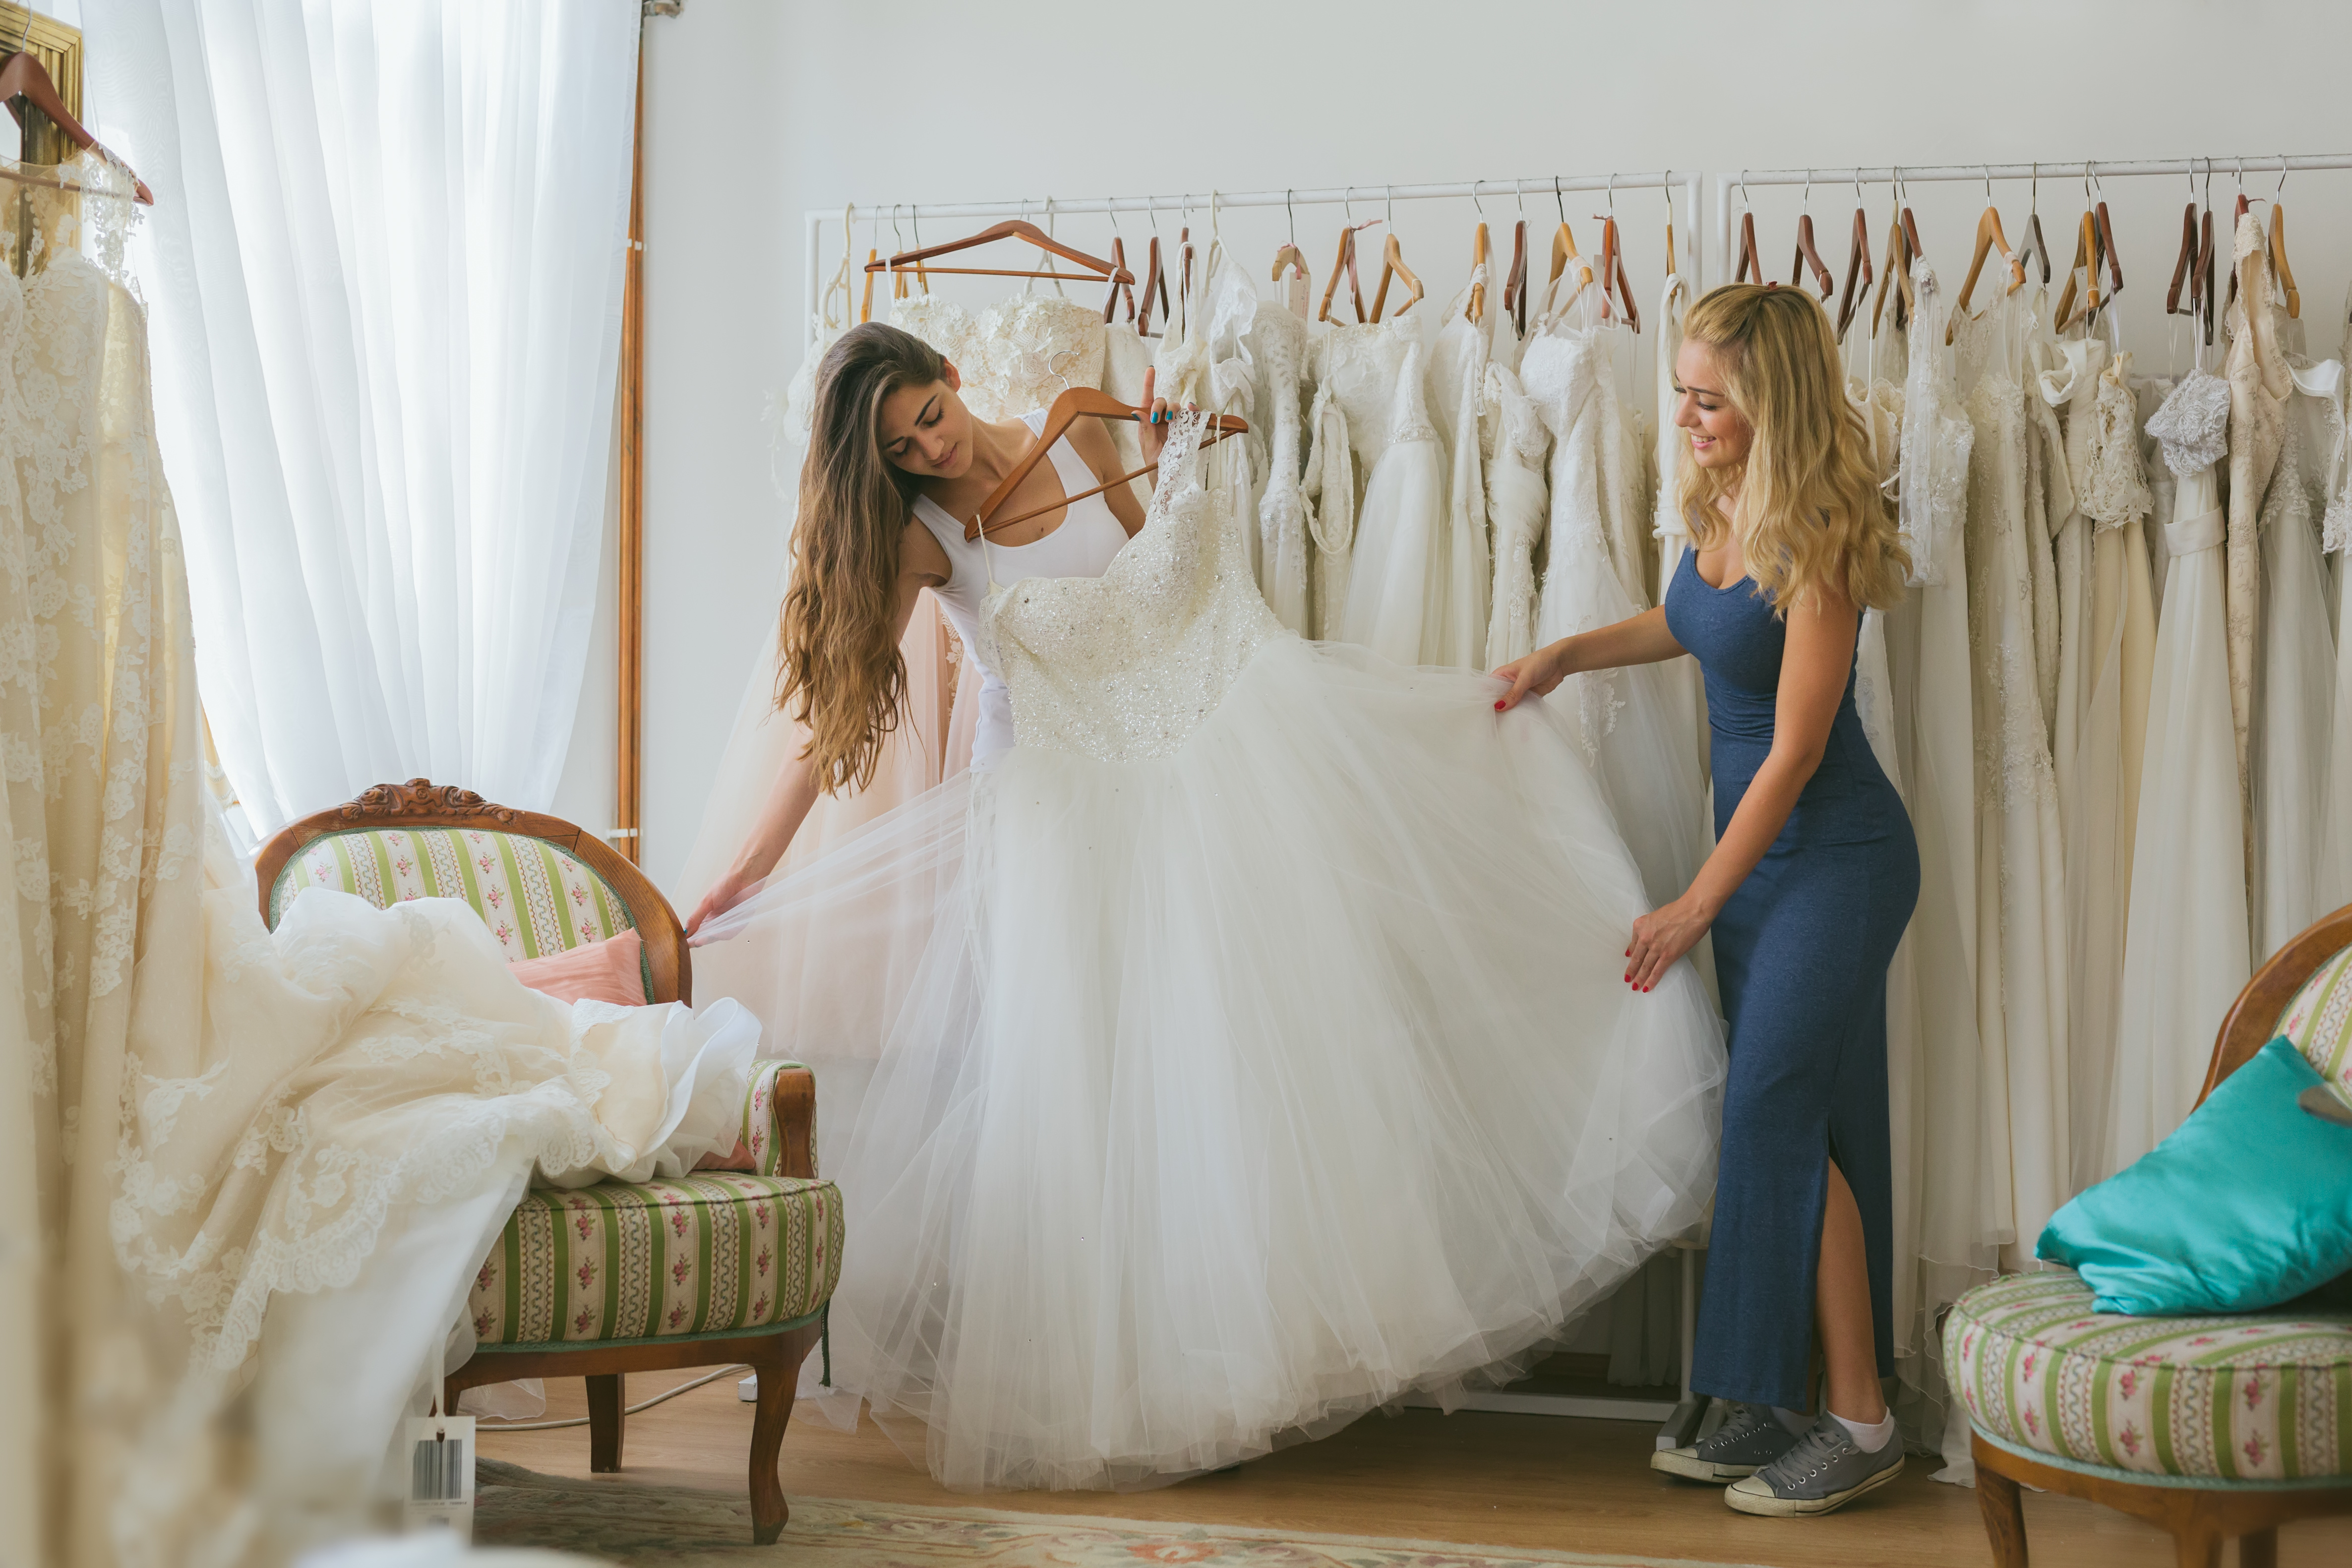 Bride Wedding Dress Shopping with her friend